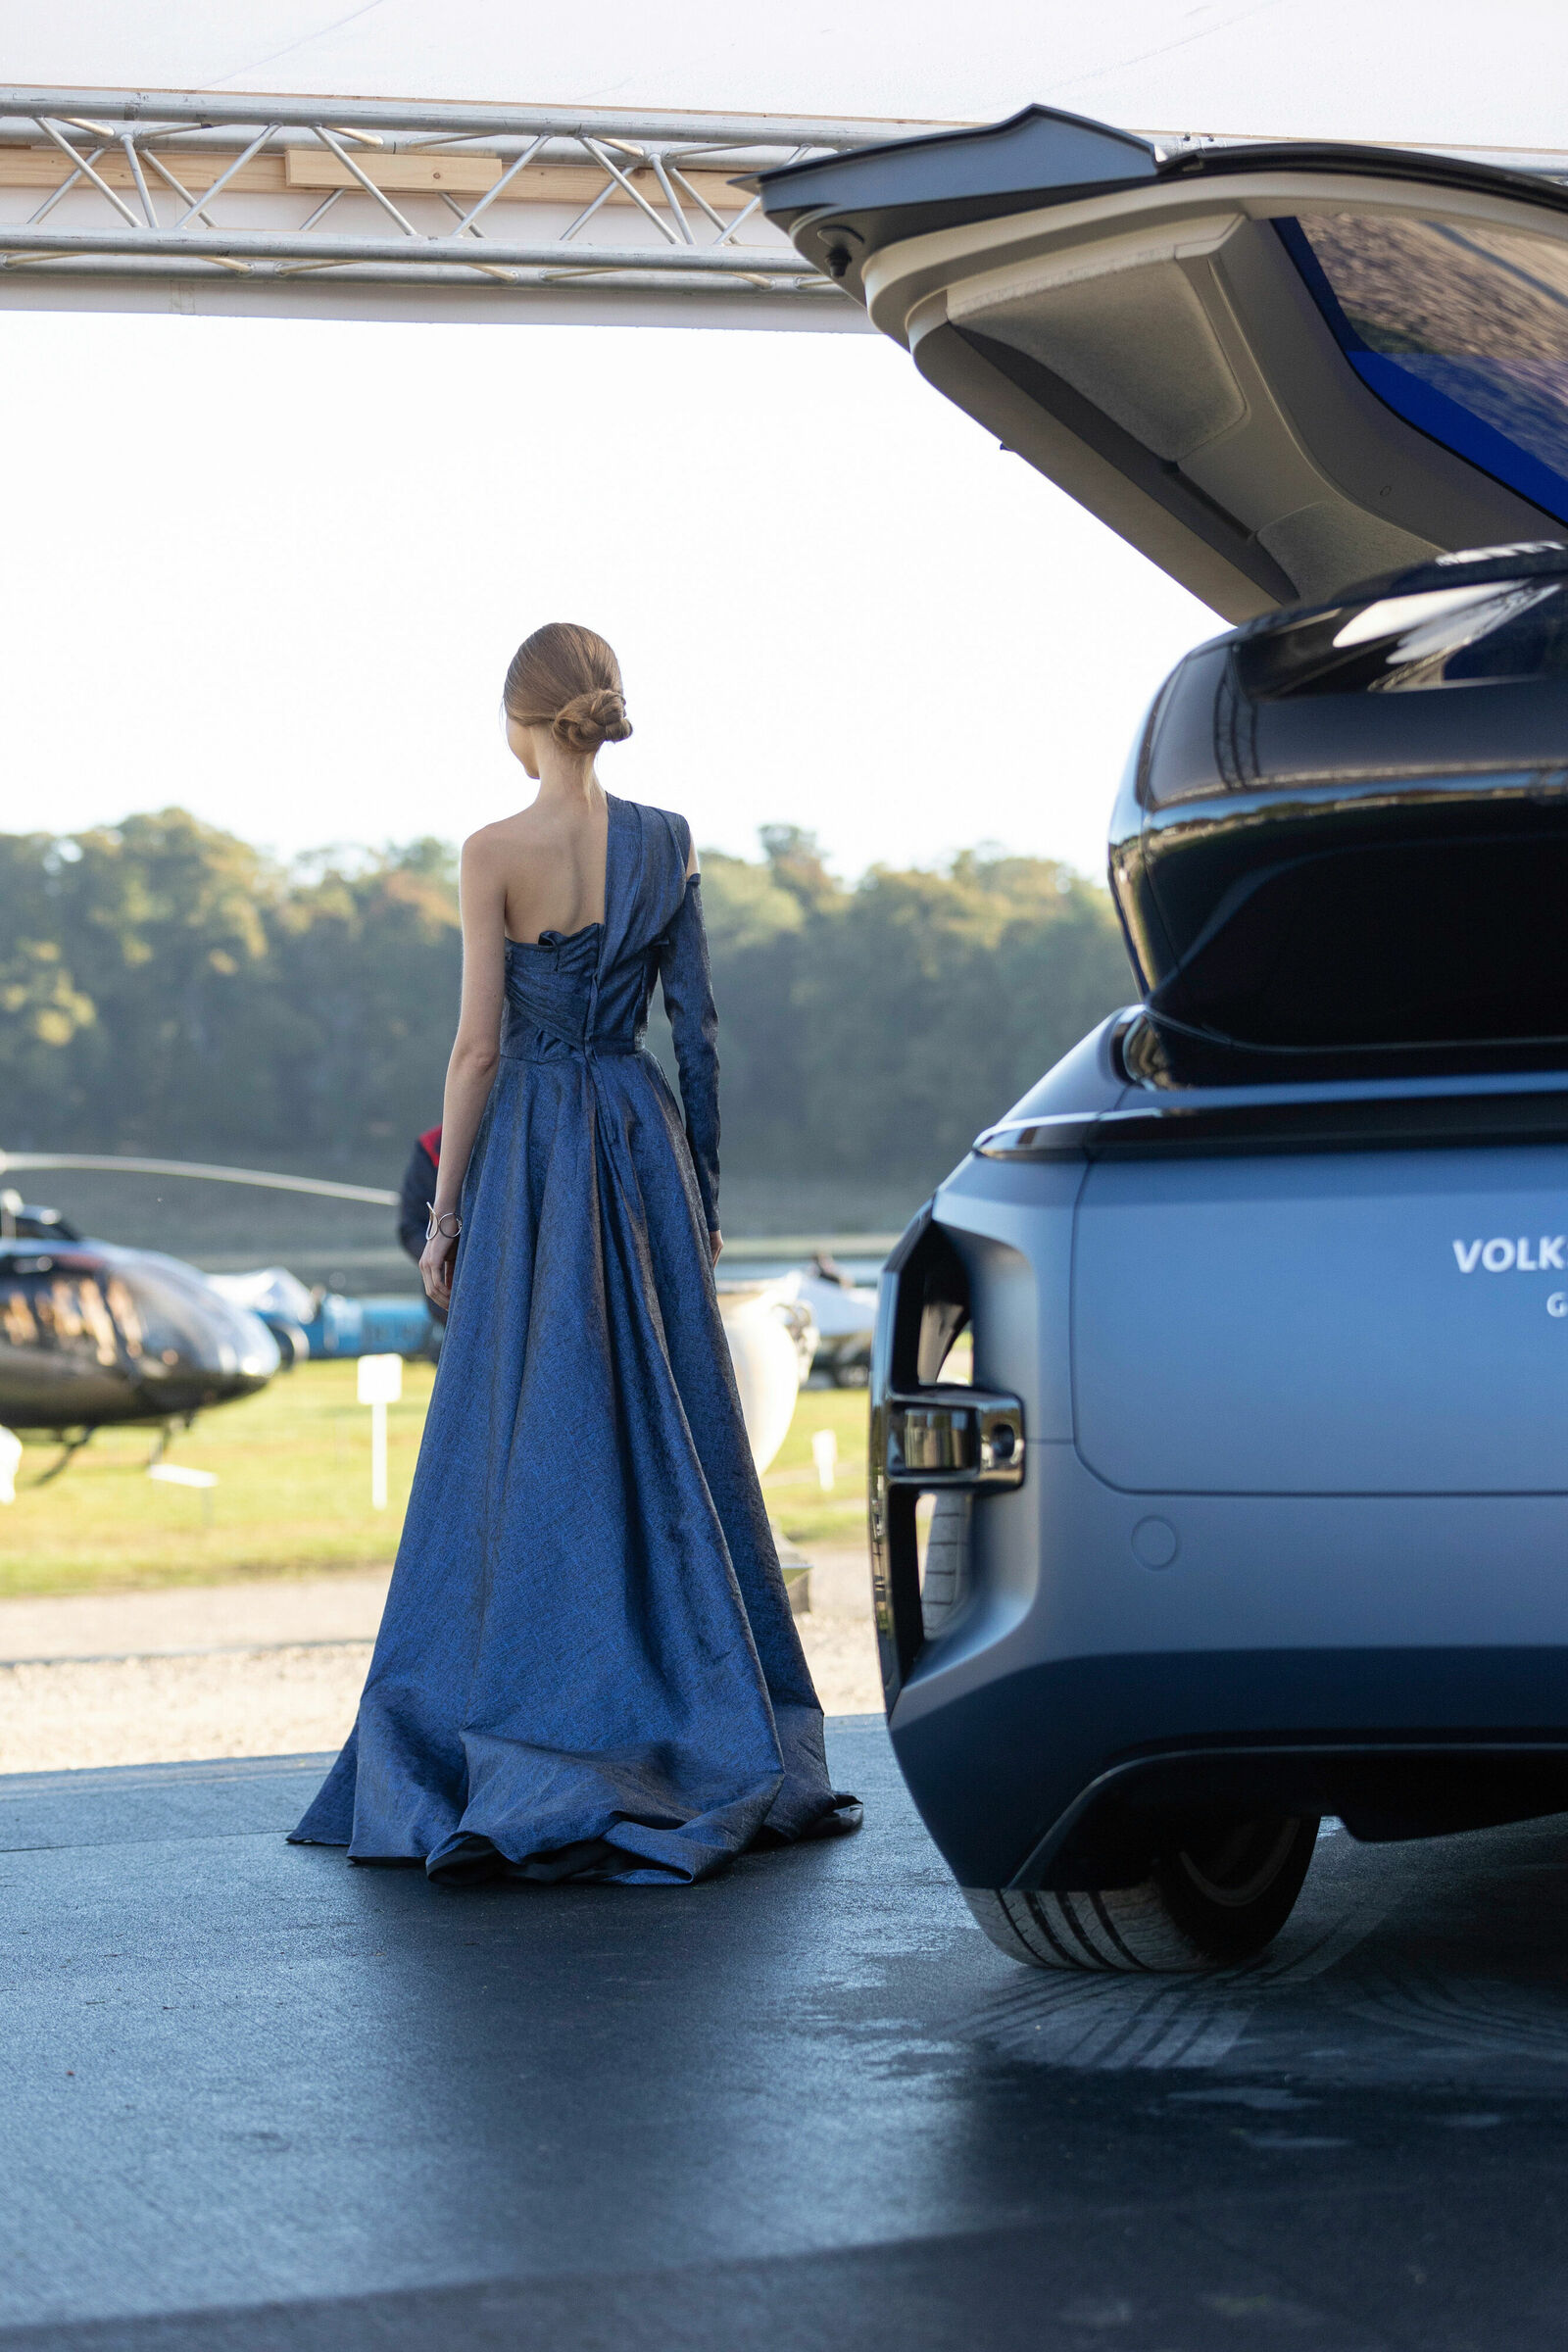 Volkswagen Group at the Chantilly Arts & Elegance 2022